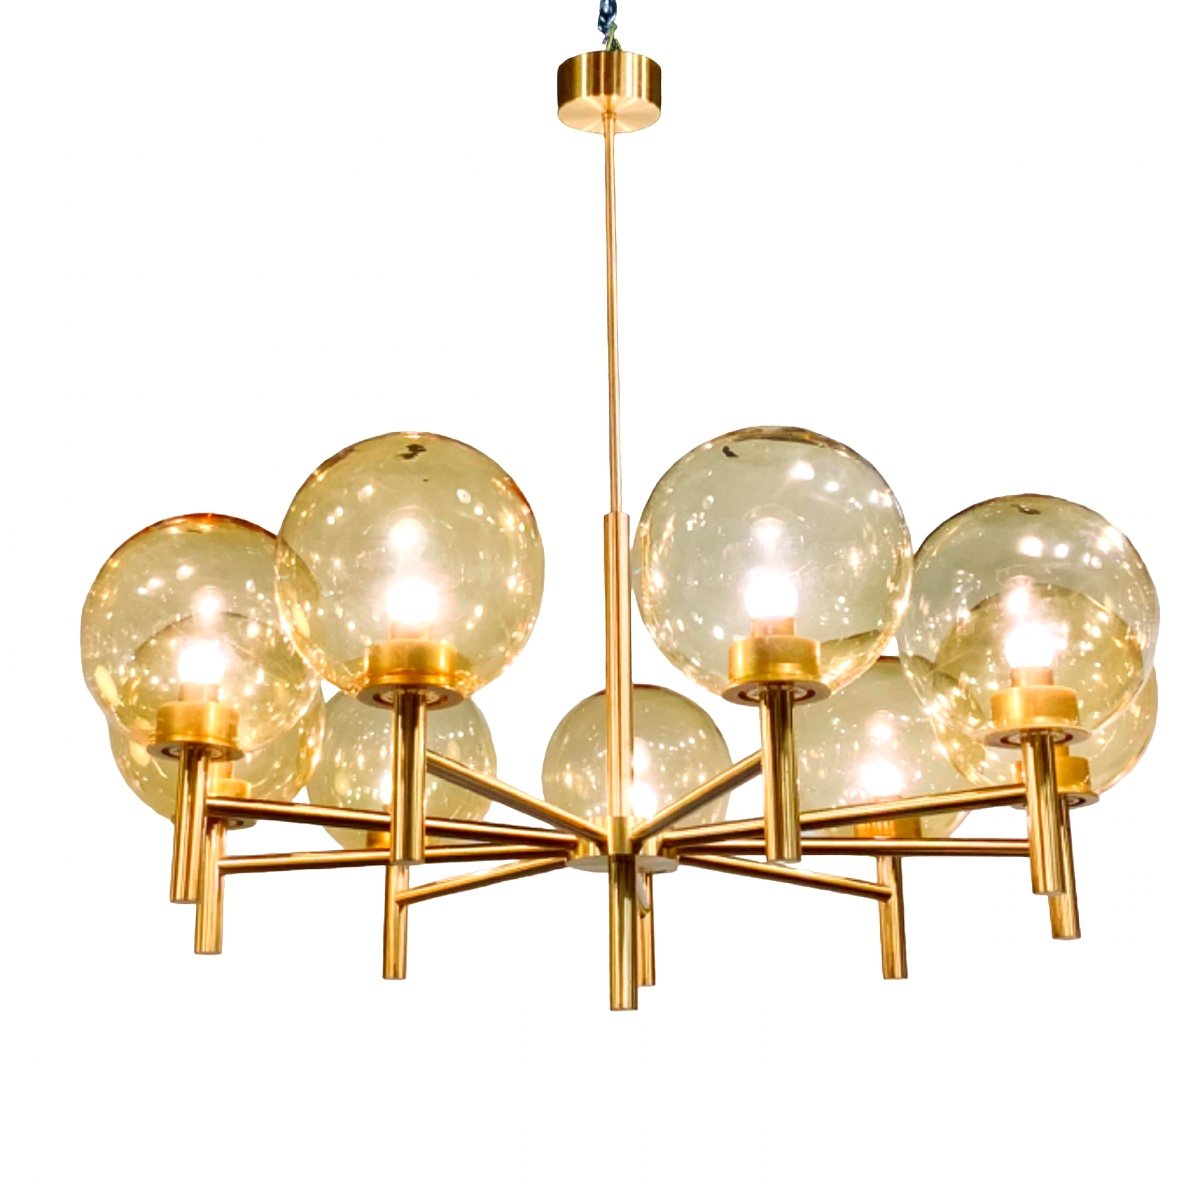 Large Luxus Chandelier With 9 Lights In Golden Brass And Amber Glass Globes, Sweden 1970s/80s-photo-8